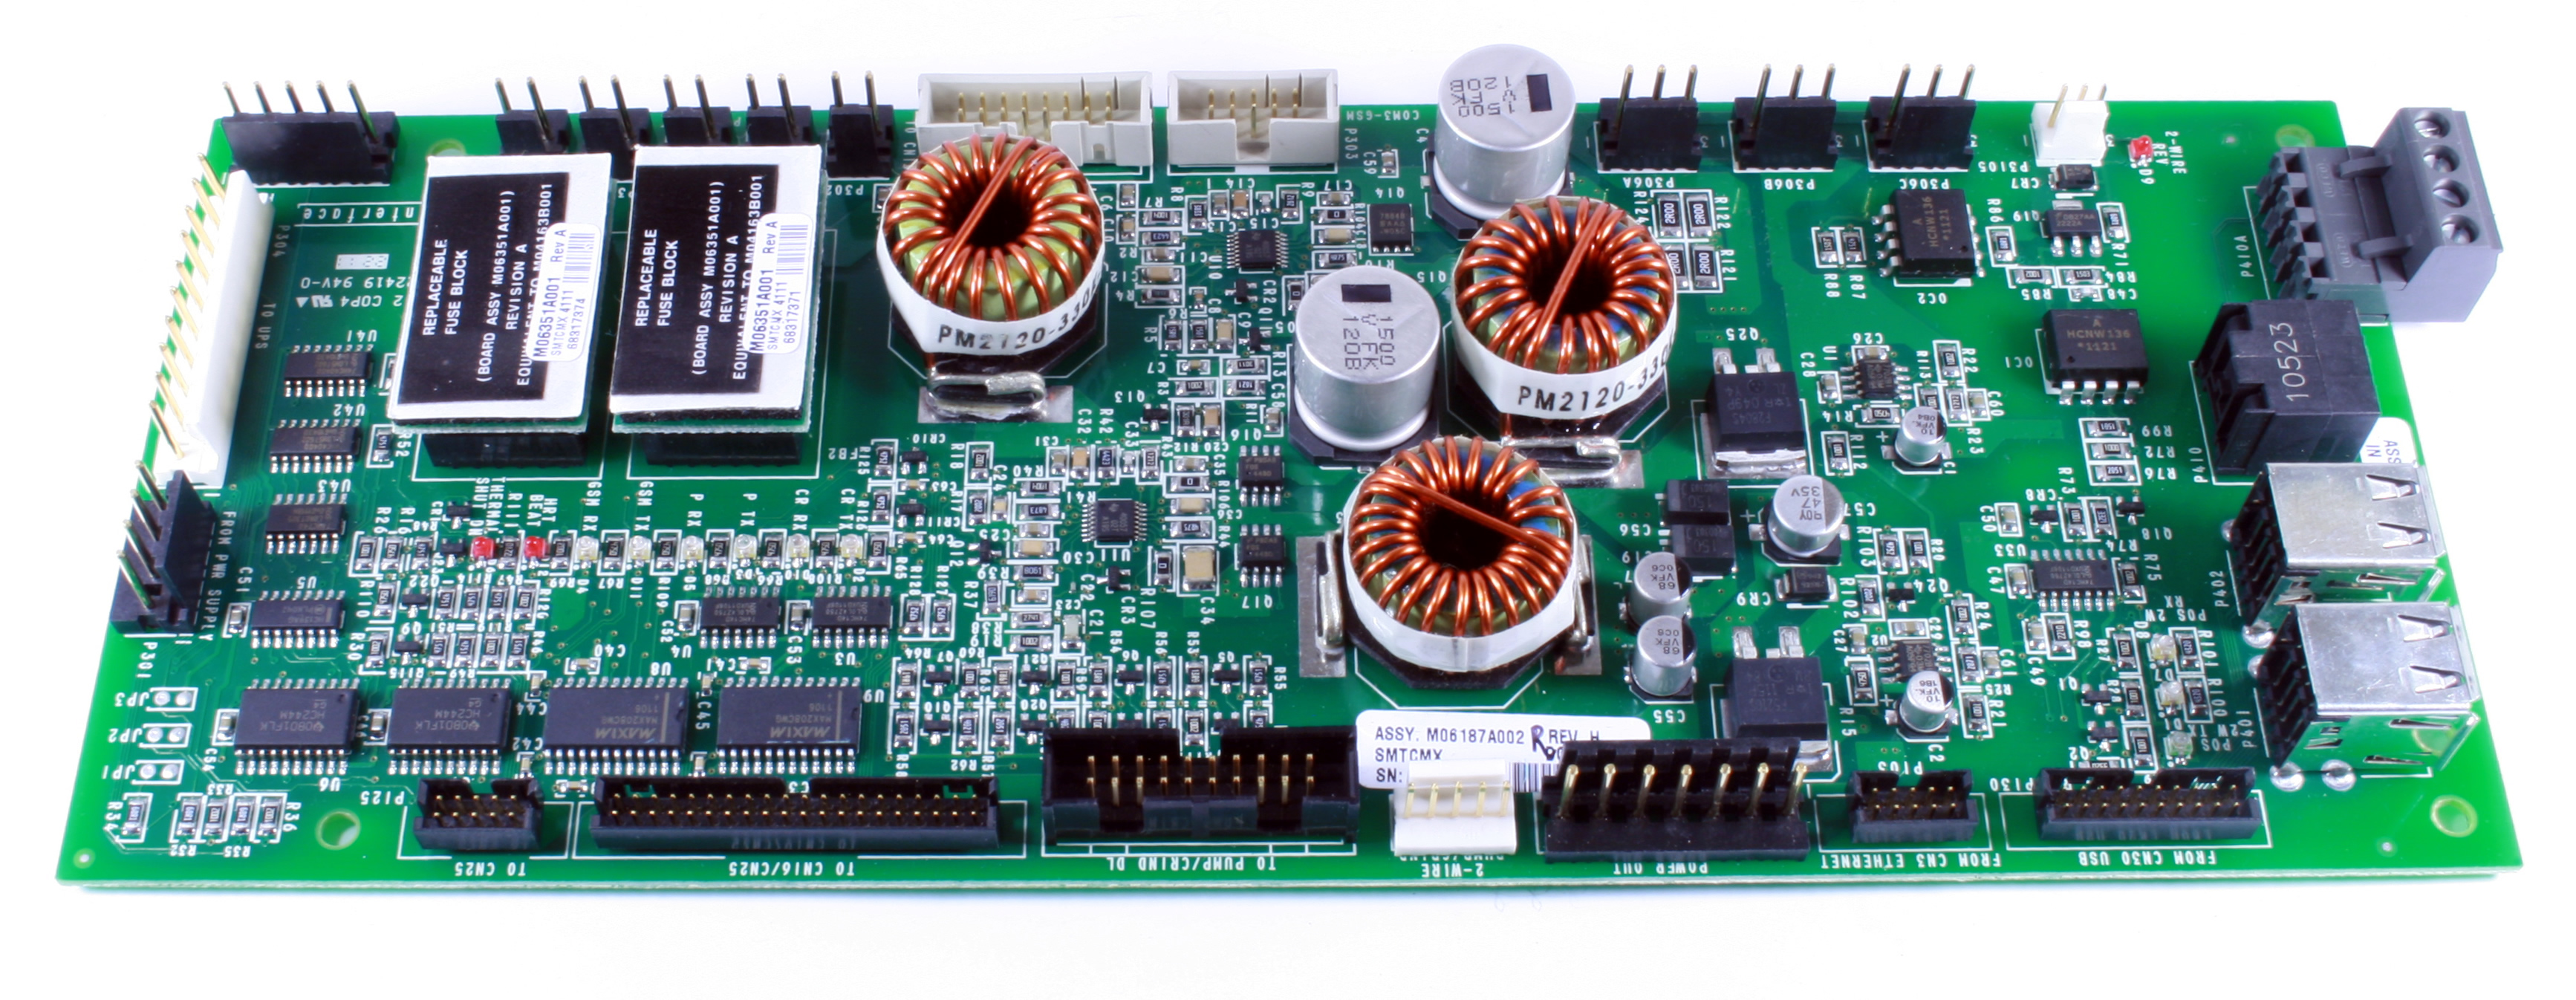 M06187A002 Gilbarco Smartcrind Interface Board.                 --- Price Includes Cost Of Core Which Will Be Refunded Upon Return Of A Rebuildable Core                 ---